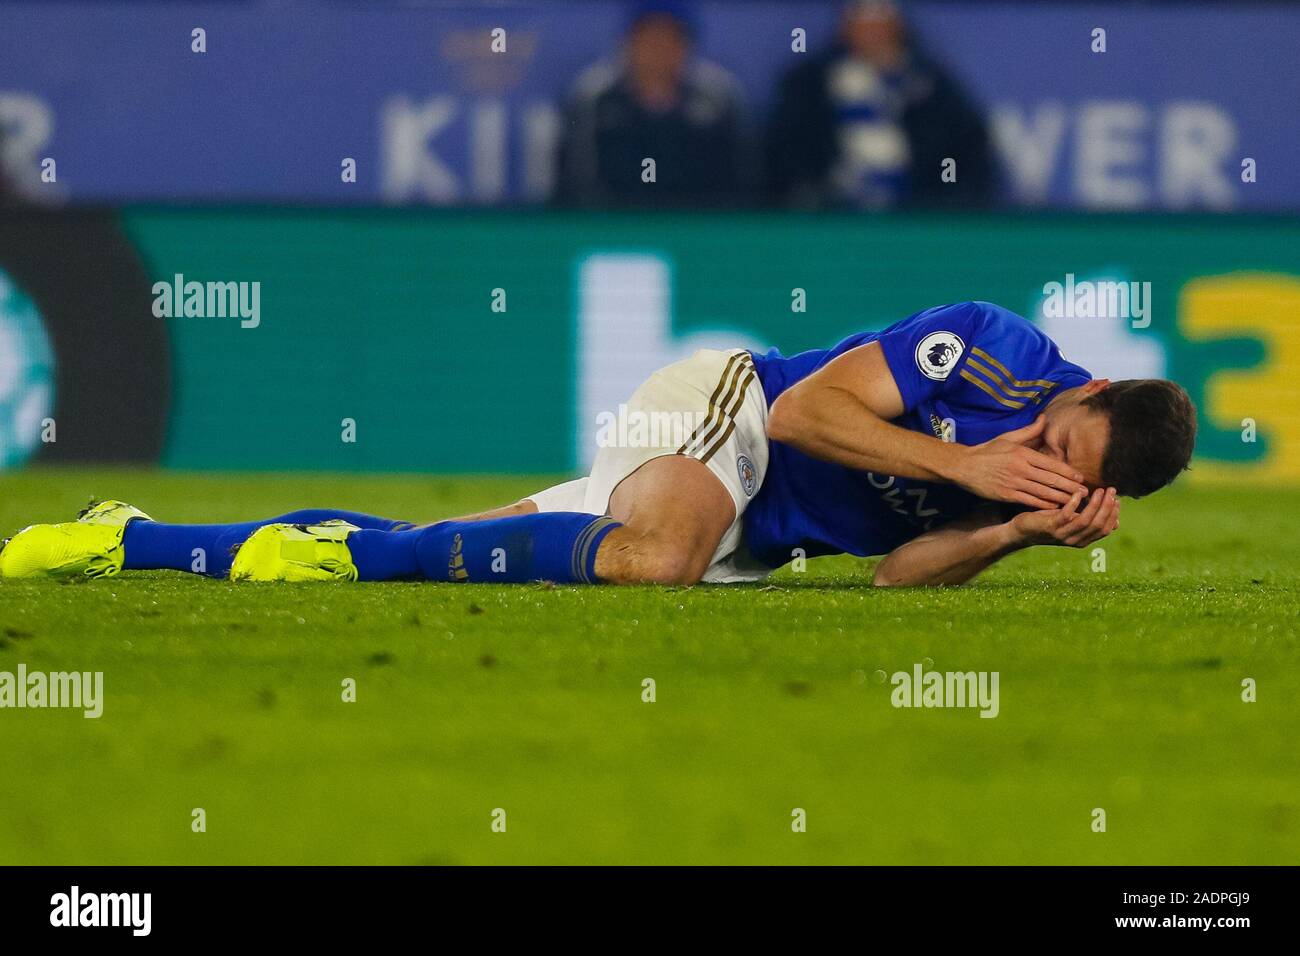 Leicester, UK. 4th December 2019; King Power Stadium, Leicester, Midlands, England; English Premier League Football, Leicester City versus Watford; Jonny Evans of Leicester City lies on the floor in the penalty area after a foul leads to a penalty for his team - Strictly Editorial Use Only. No use with unauthorized audio, video, data, fixture lists, club/league logos or 'live' services. Online in-match use limited to 120 images, no video emulation. No use in betting, games or single club/league/player publications Stock Photo